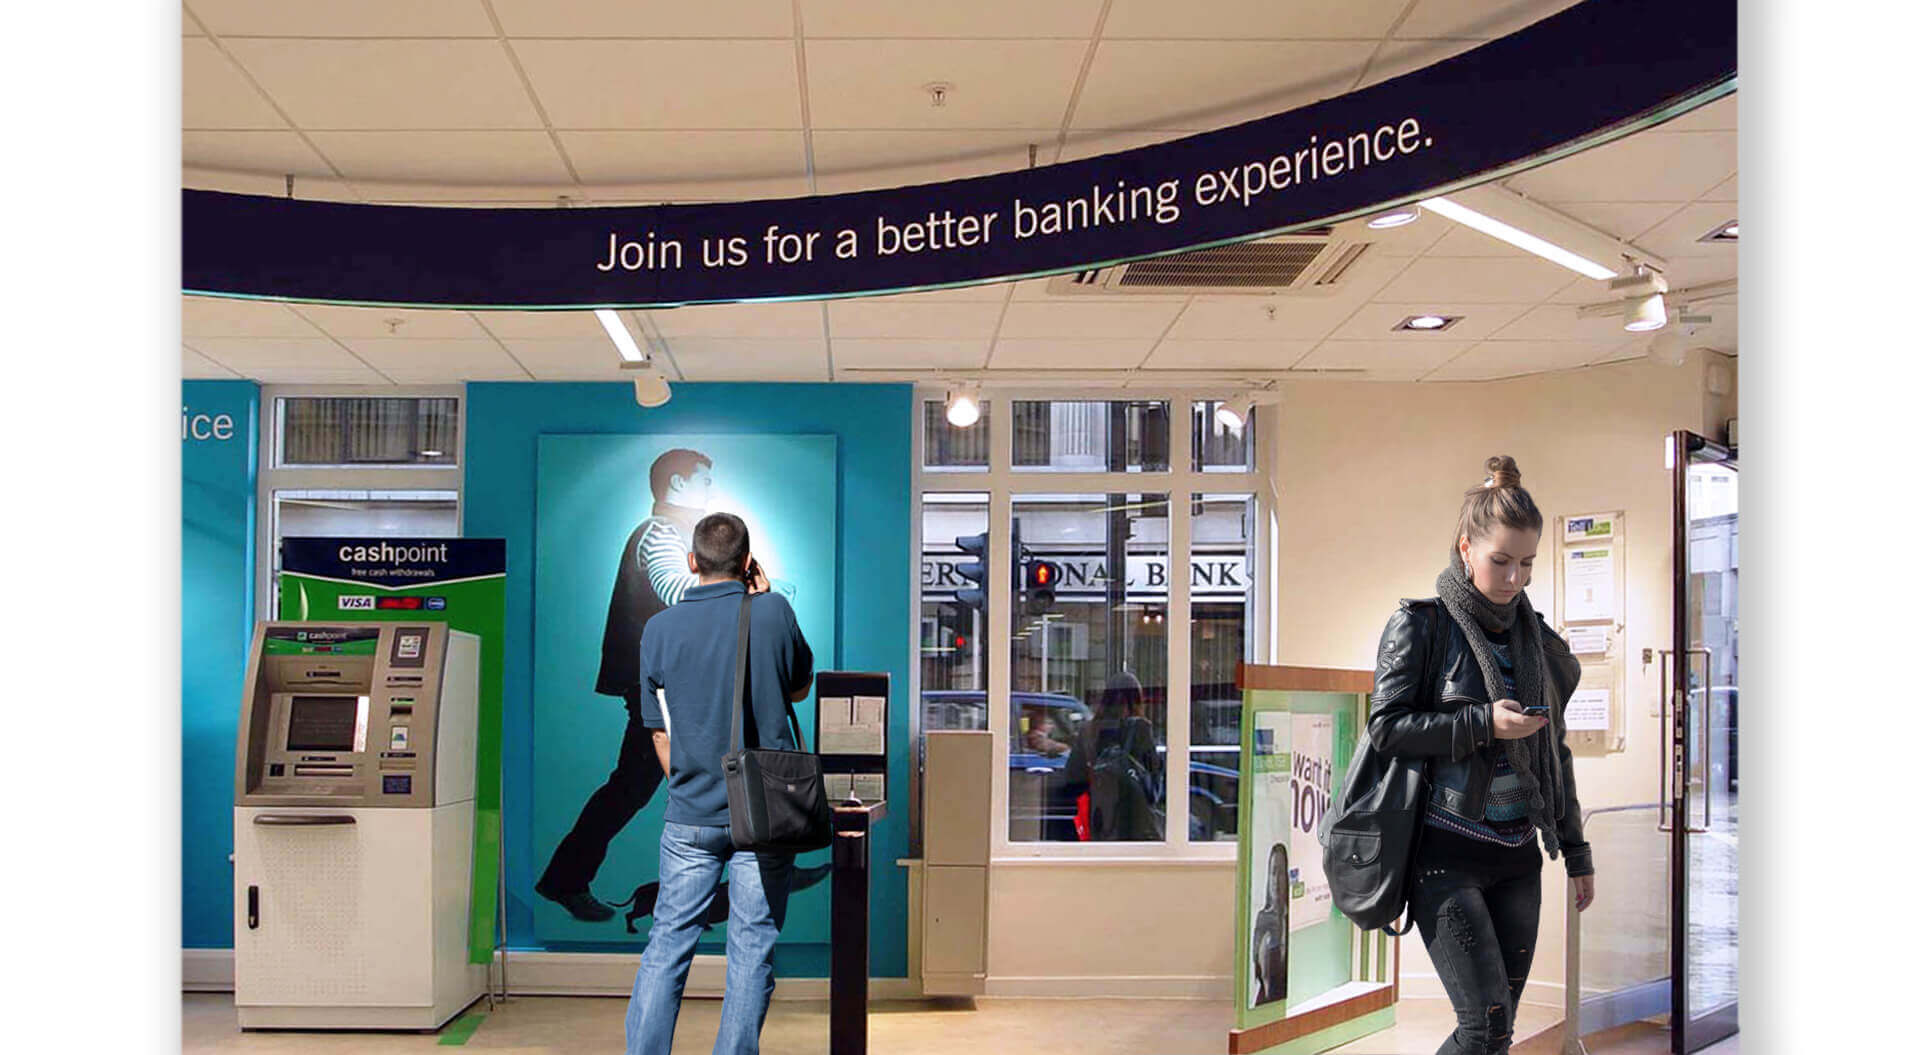 A Lloyds bank brand and retail network branch audit plans a future position.